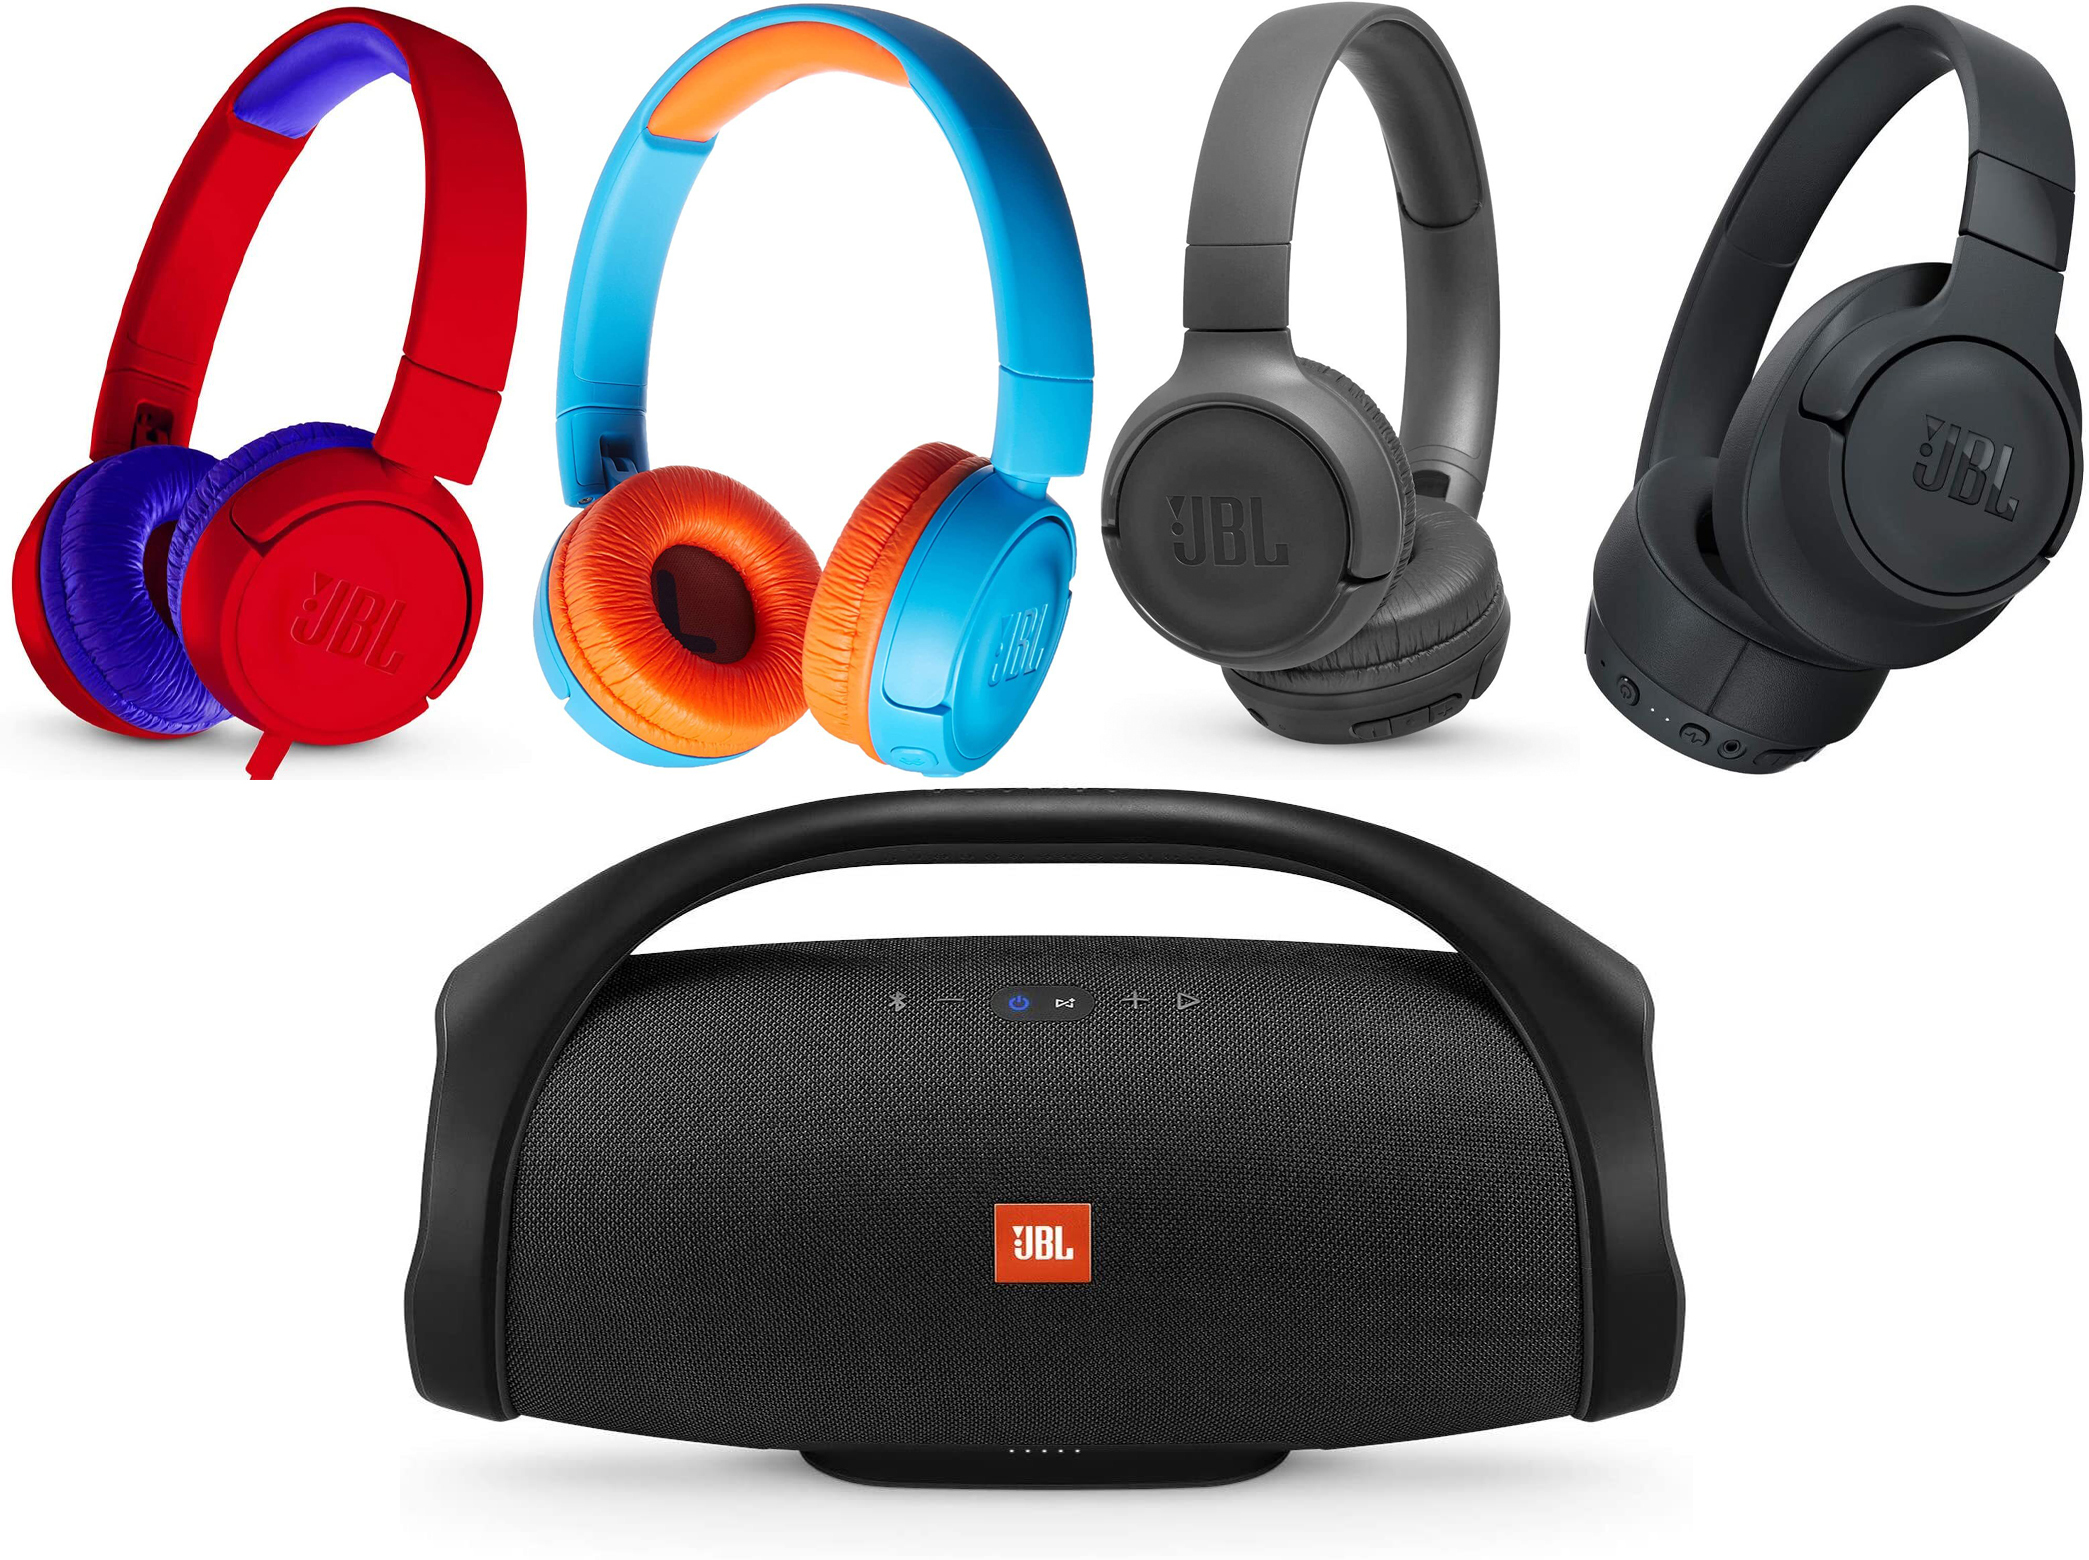 Amazon Prime Day’s JBL sale can get you a pair of headphones for under $15